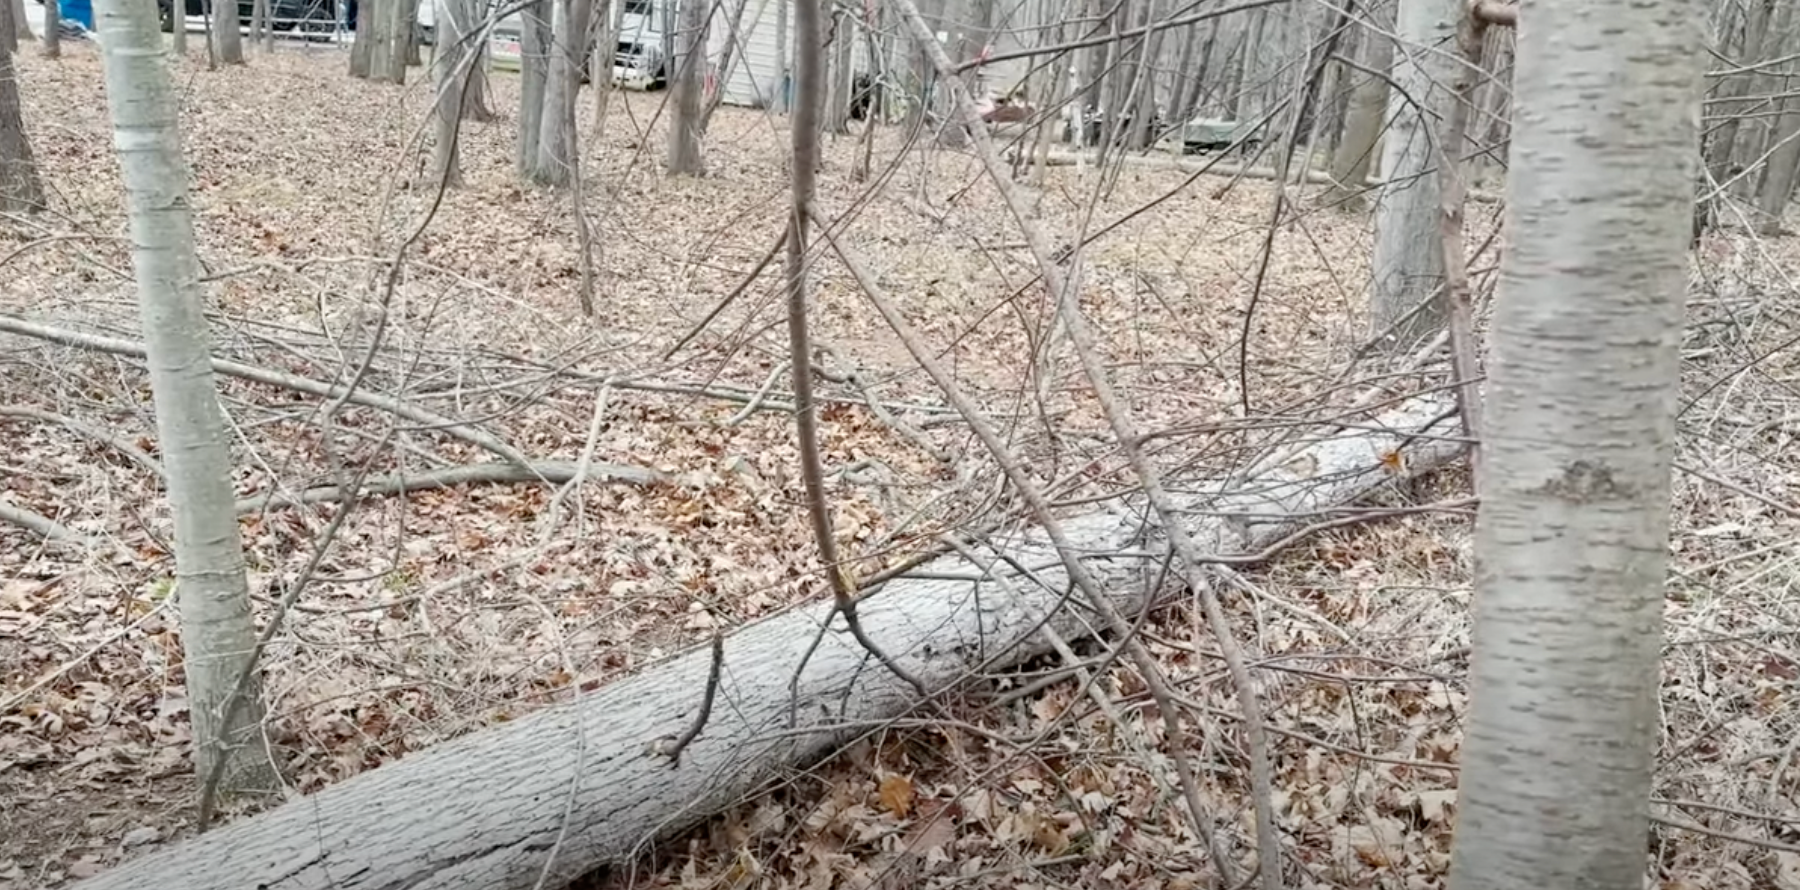 The Importance of Coarse Woody Debris Video 